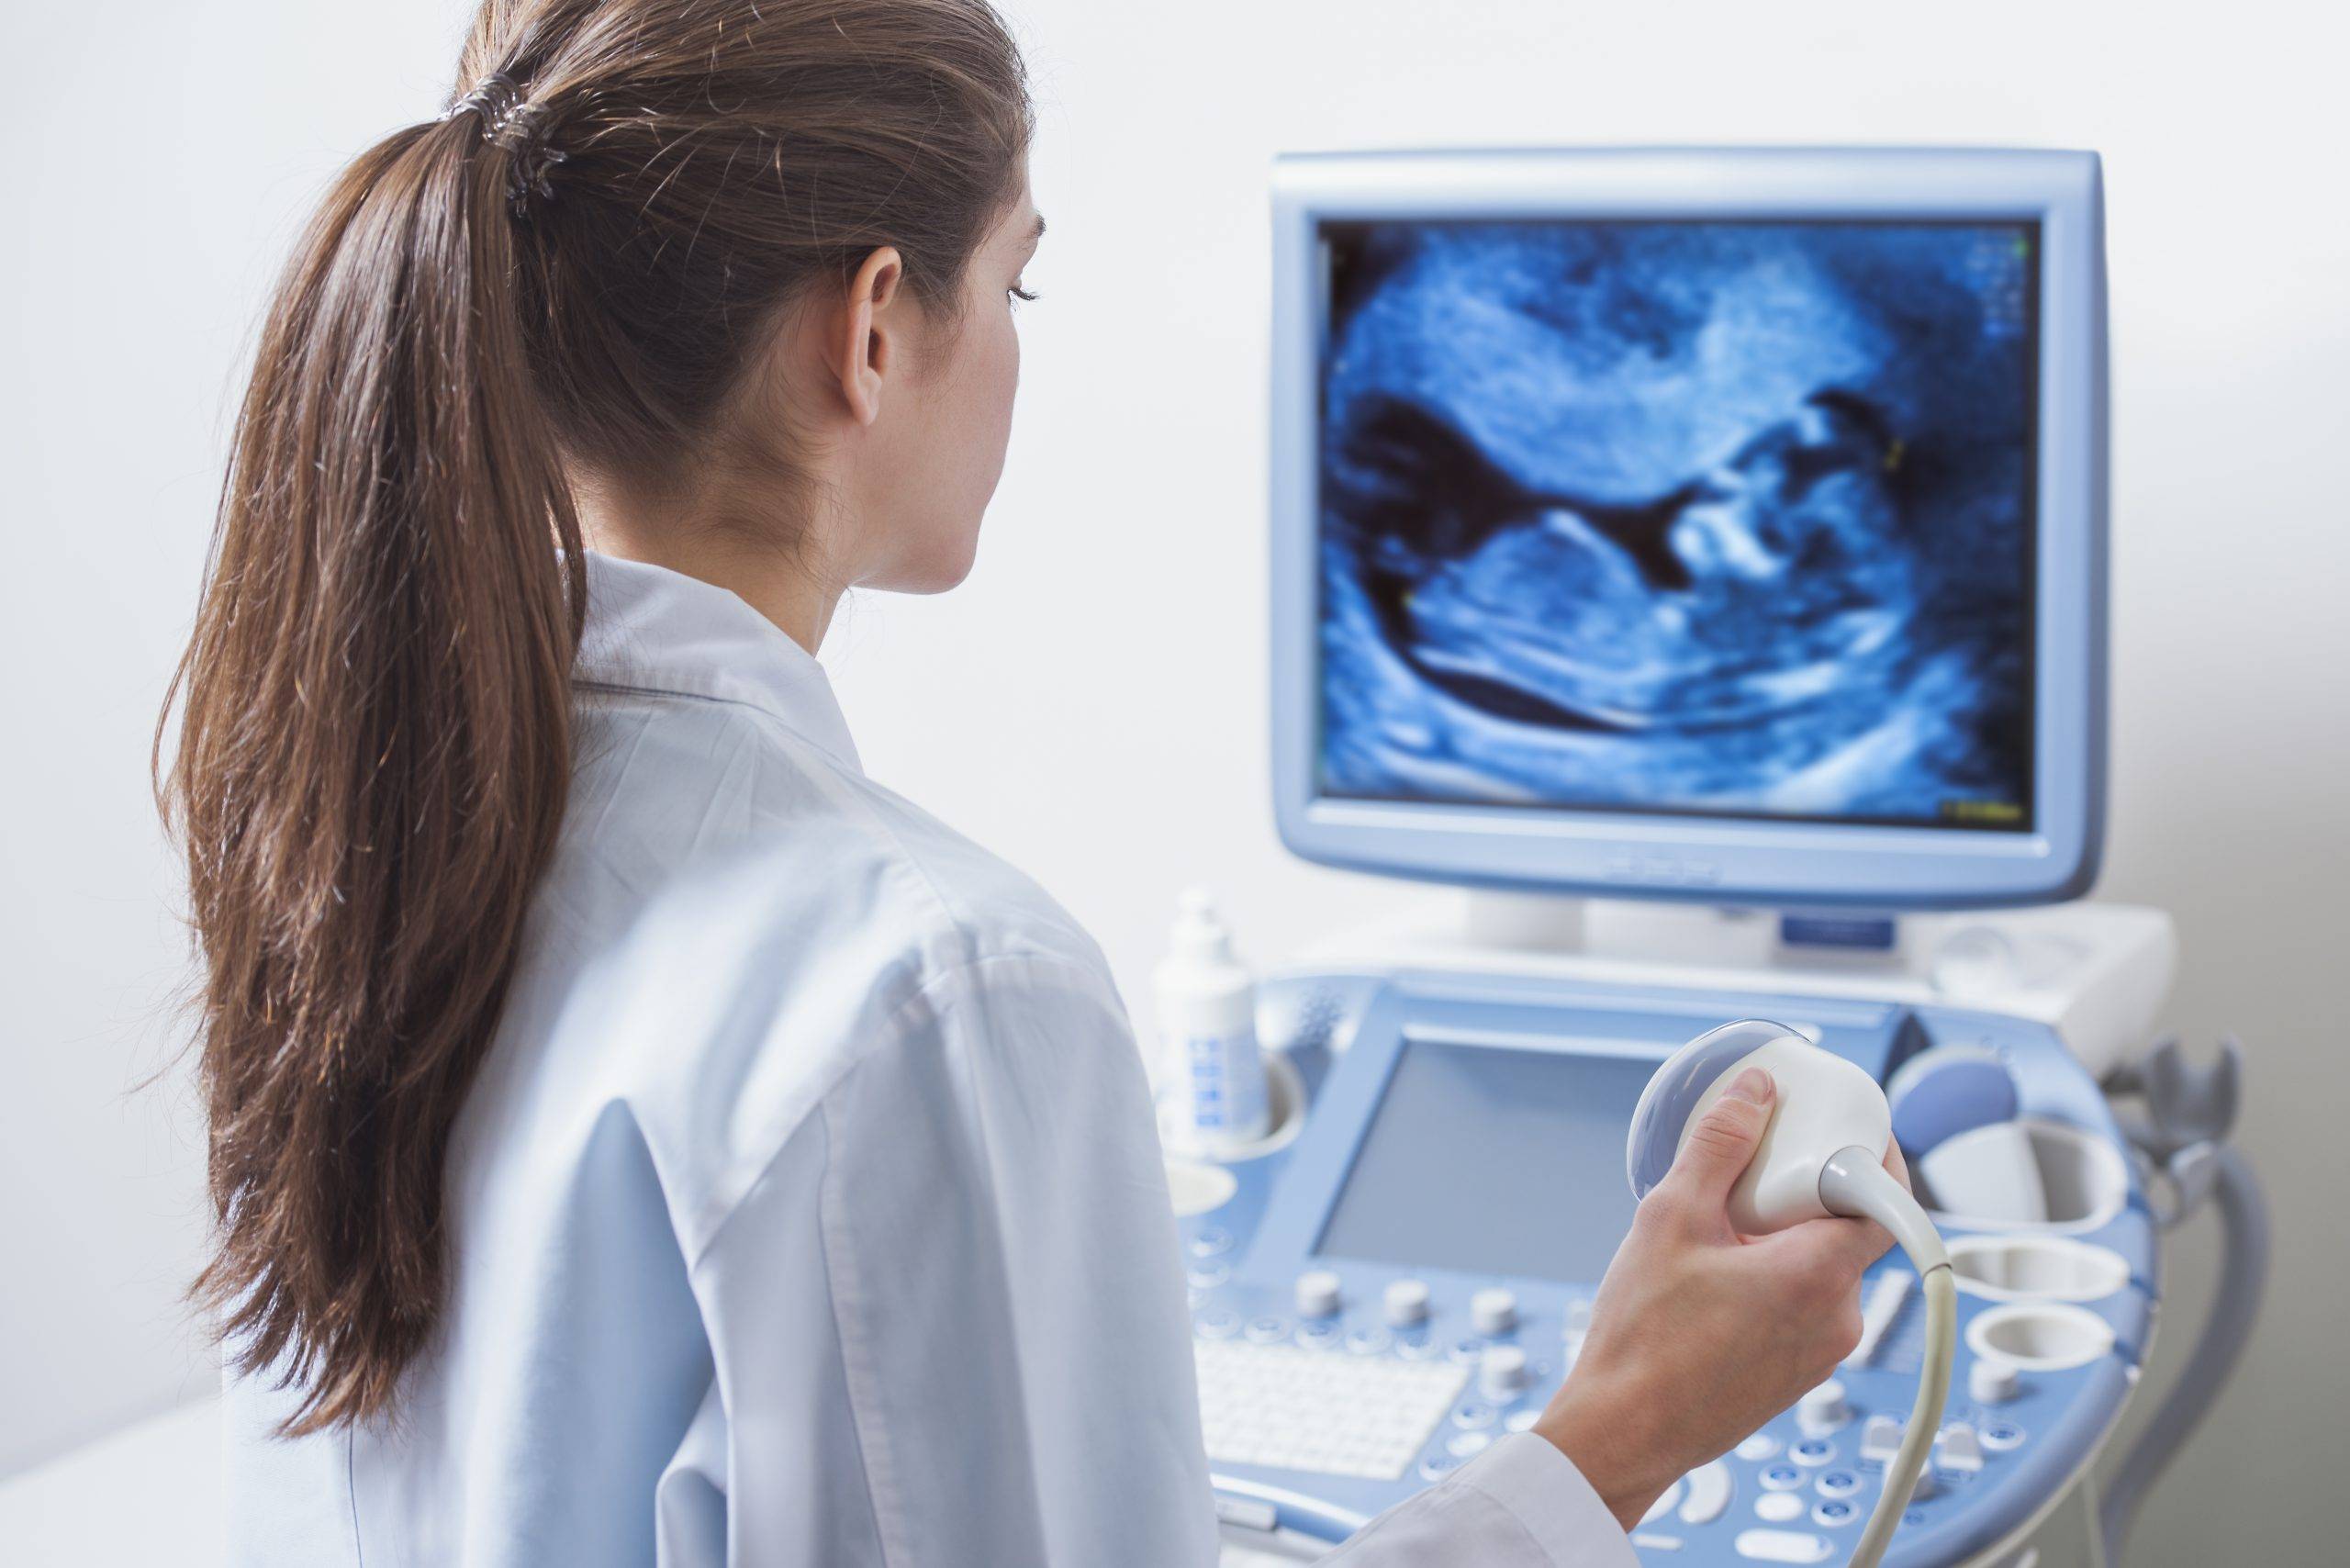 Want to work in healthcare? Here's how to get a degree in sonography